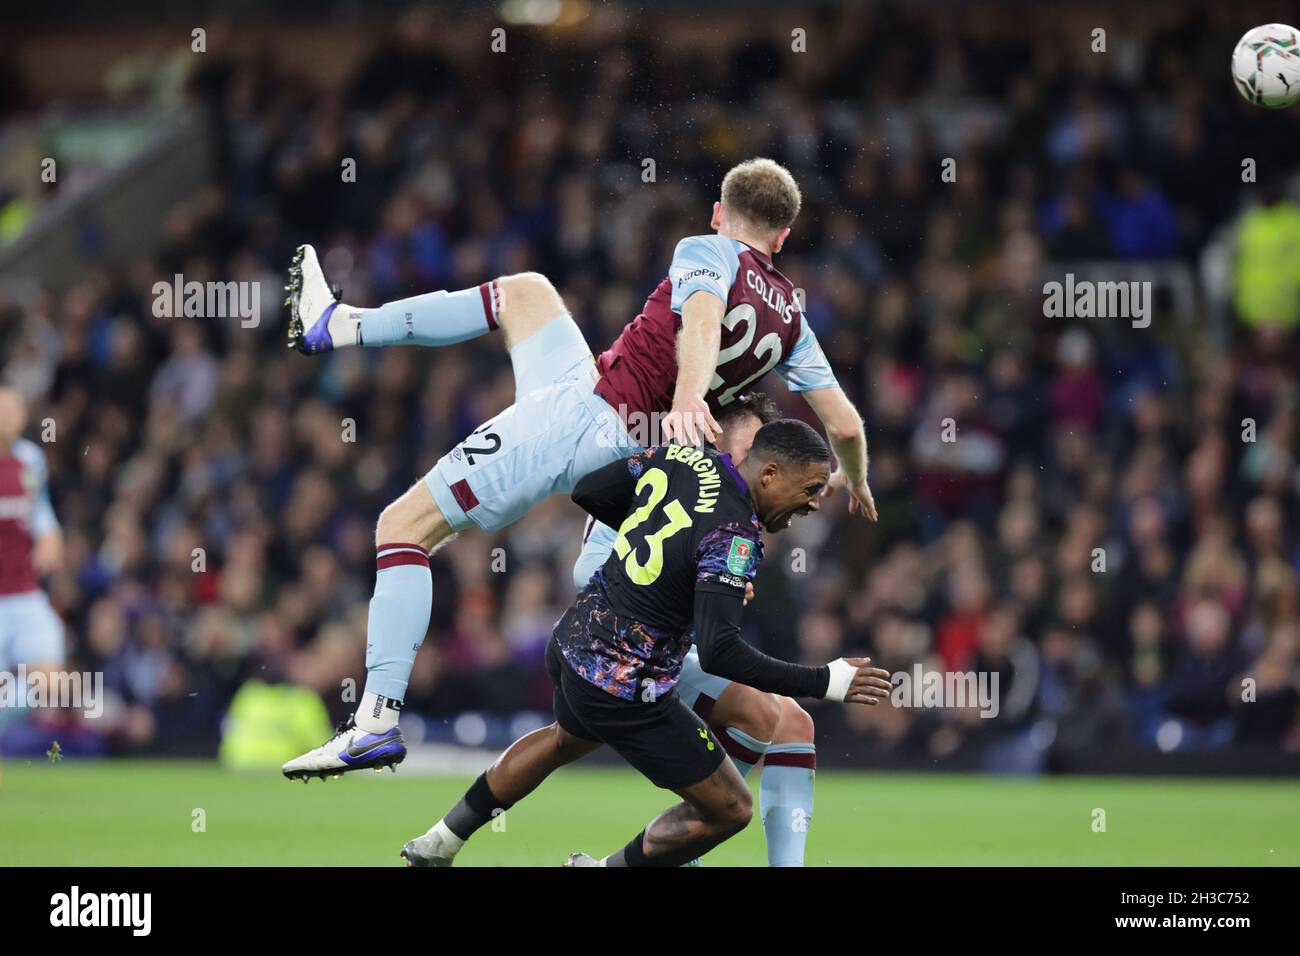 BURNLEY, UK. OCT 27TH Nathan Collins of Burnley tangles with Steven Bergwijn of Tottenham Hotspur during the Carabao Cup match between Burnley and Tottenham Hotspur at Turf Moor, Burnley on Wednesday 27th October 2021. (Credit: Pat Scaasi | MI News) Credit: MI News & Sport /Alamy Live News Stock Photo